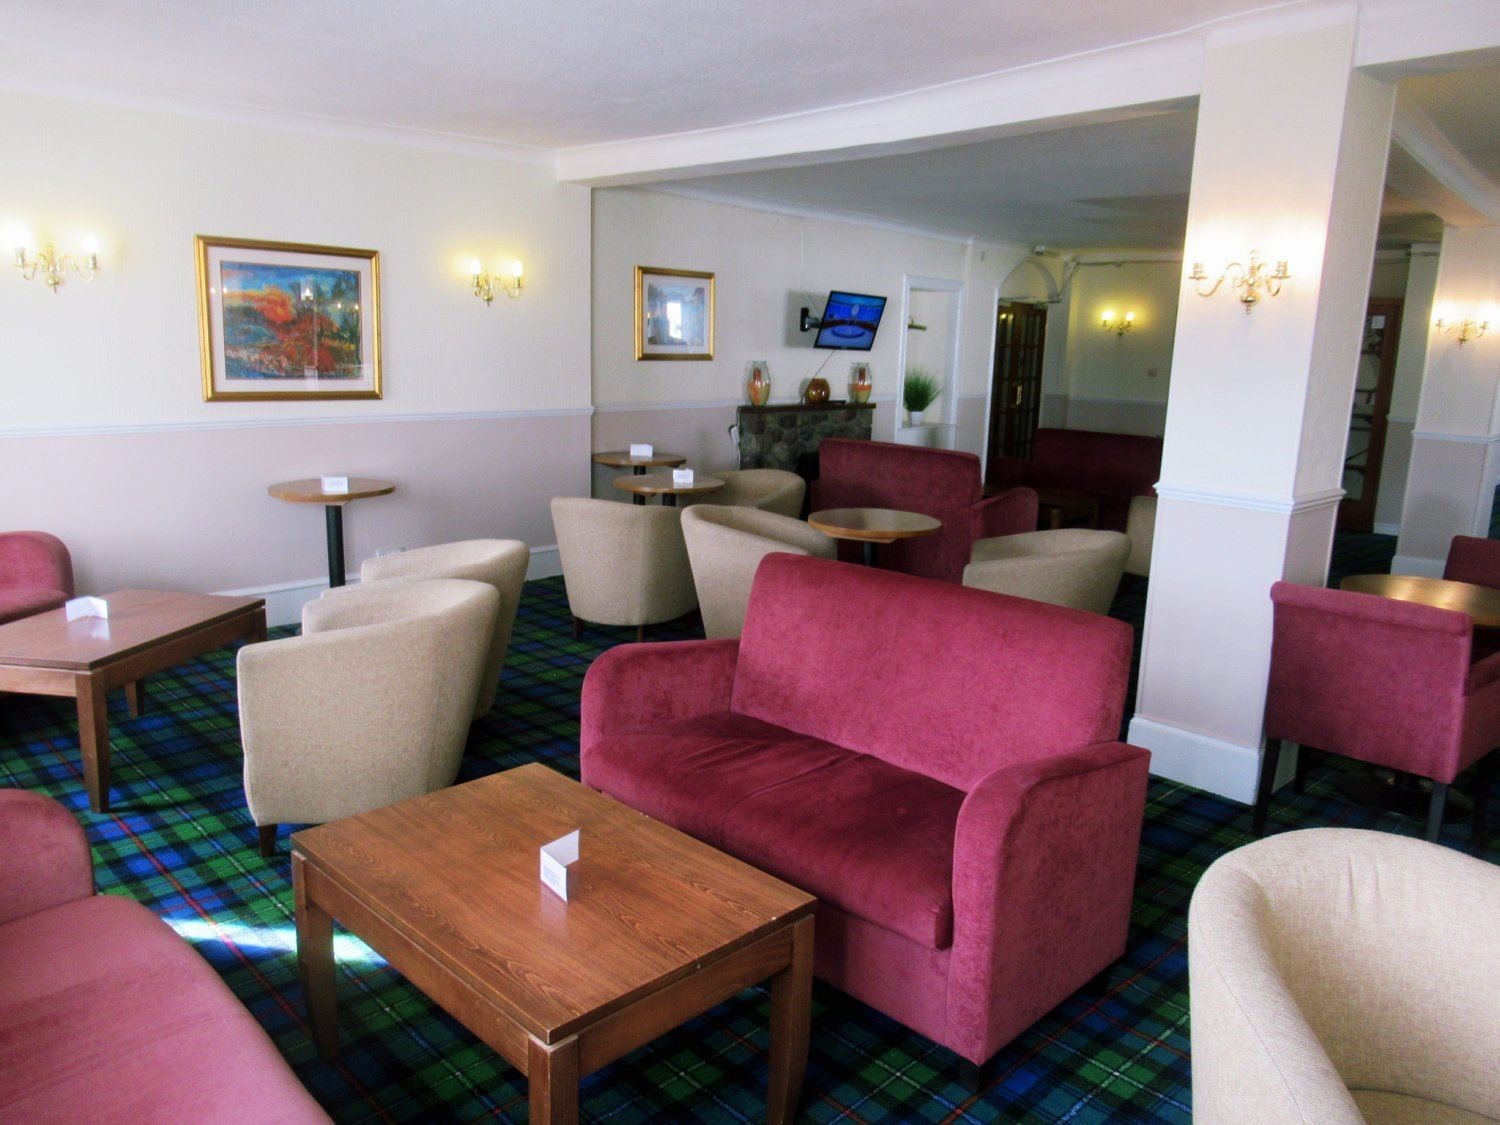 The hotel has a long history but has been modernised down the years.